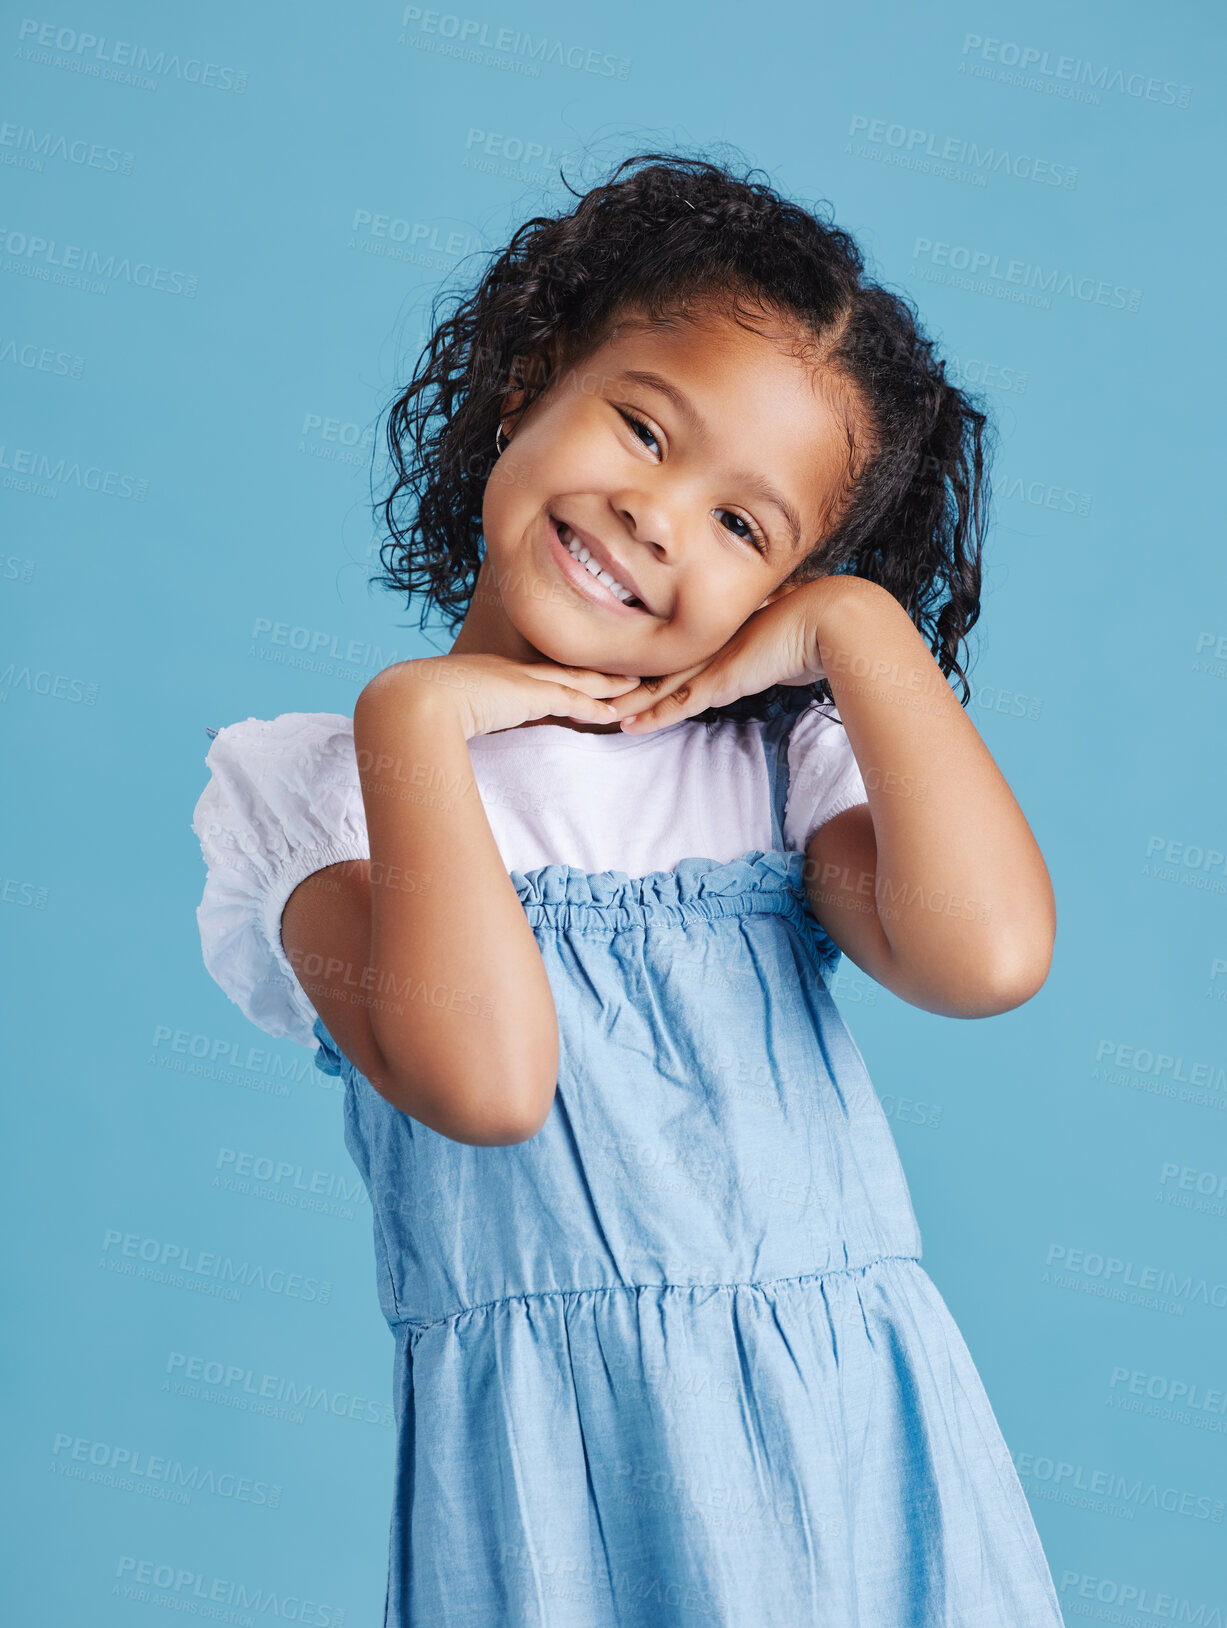 Buy stock photo Portrait of happy smiling little girl posing with her hands under her face showing a healthy dental smile against blue studio background. Cute mixed race kid in casual clothes